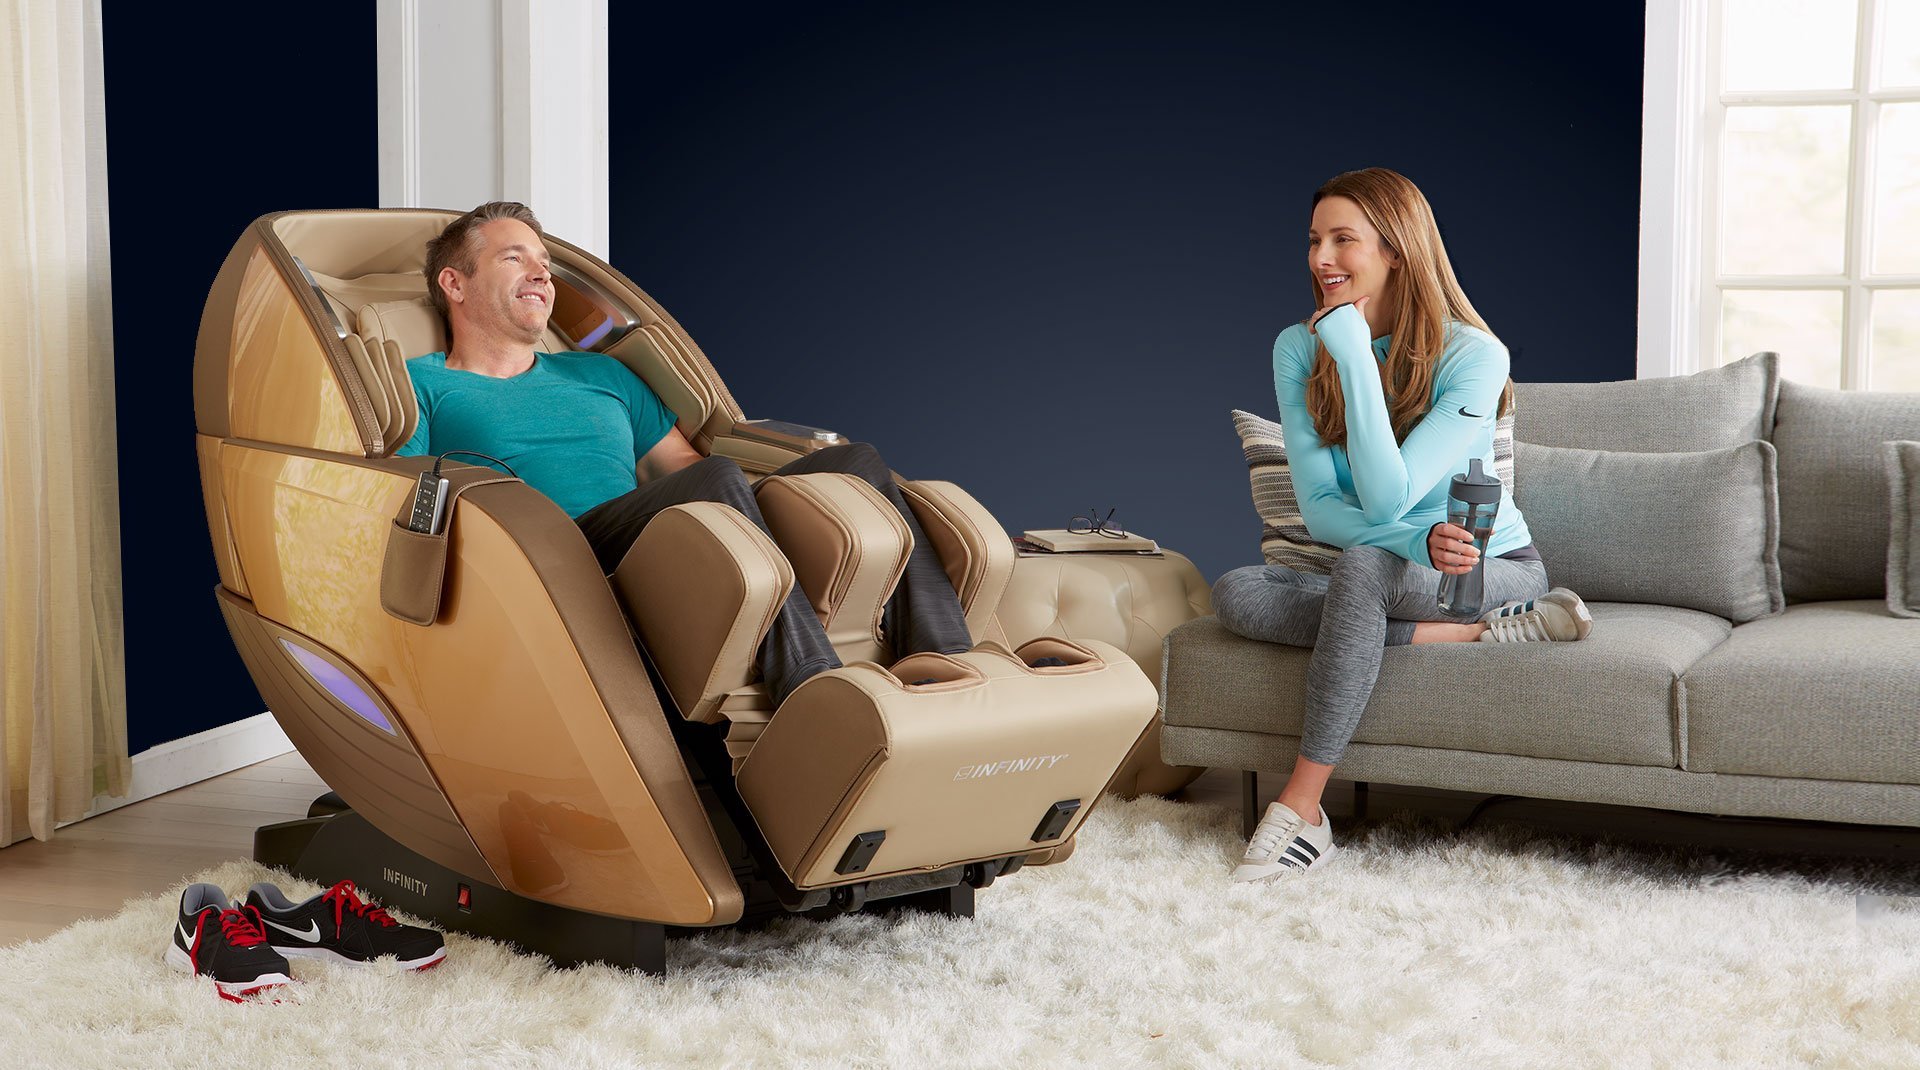 The 10 Best Leg Massage Chairs for 2022